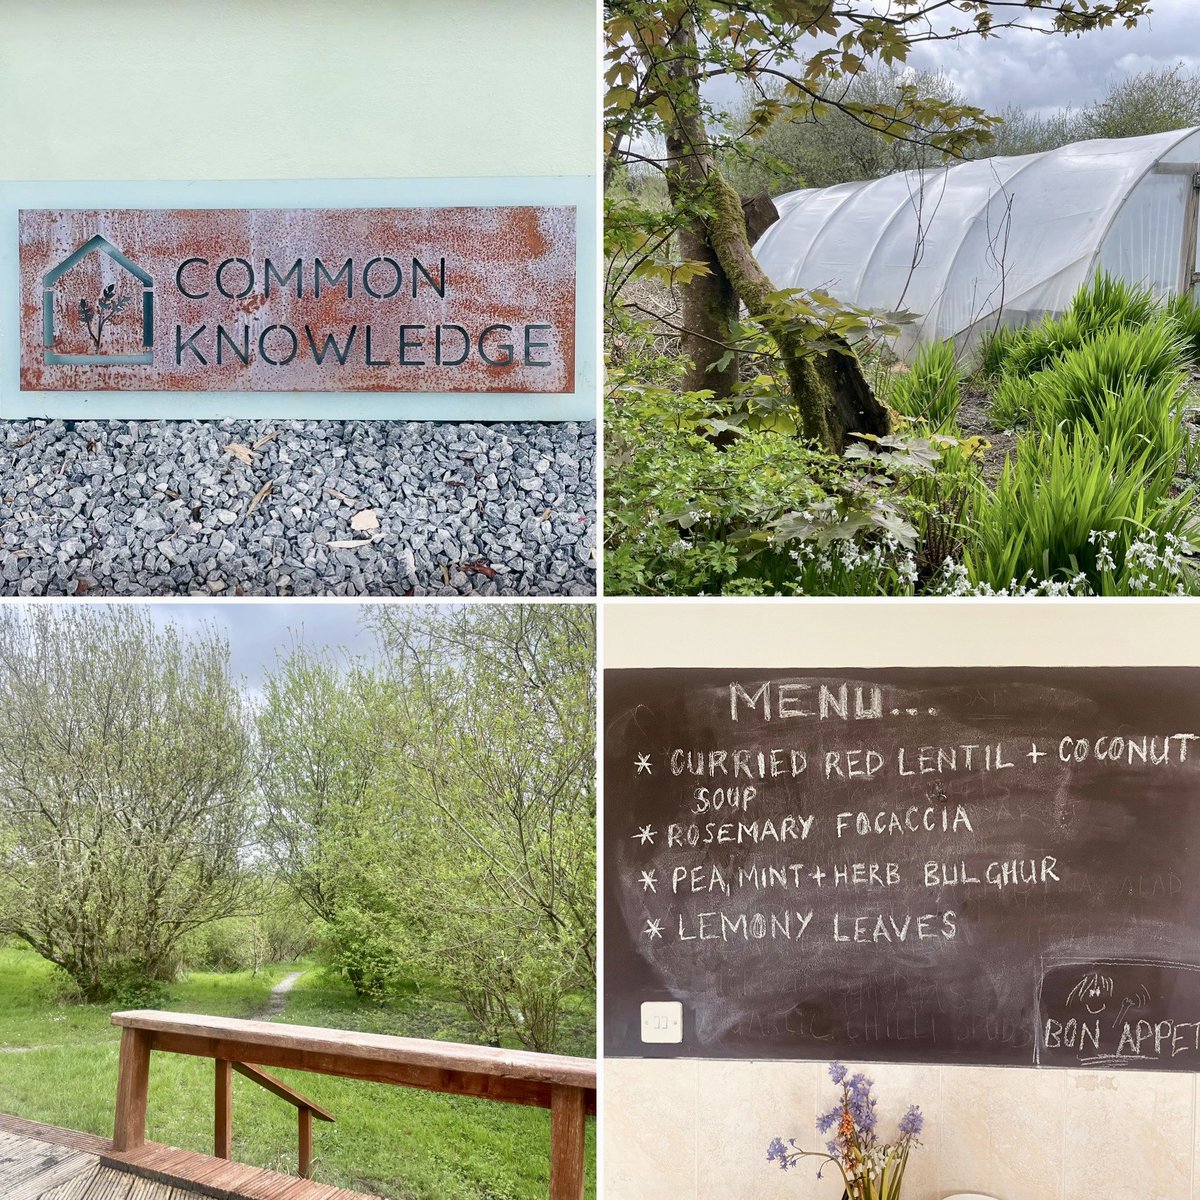 So great to visit @common_k_ in their beautiful new home in Co. Clare. It is brilliant to see so many people here gaining skills to live sustainable lives, to see the community that is forming around Common Knowledge, and to witness the redefining of what is possible. #SoCent